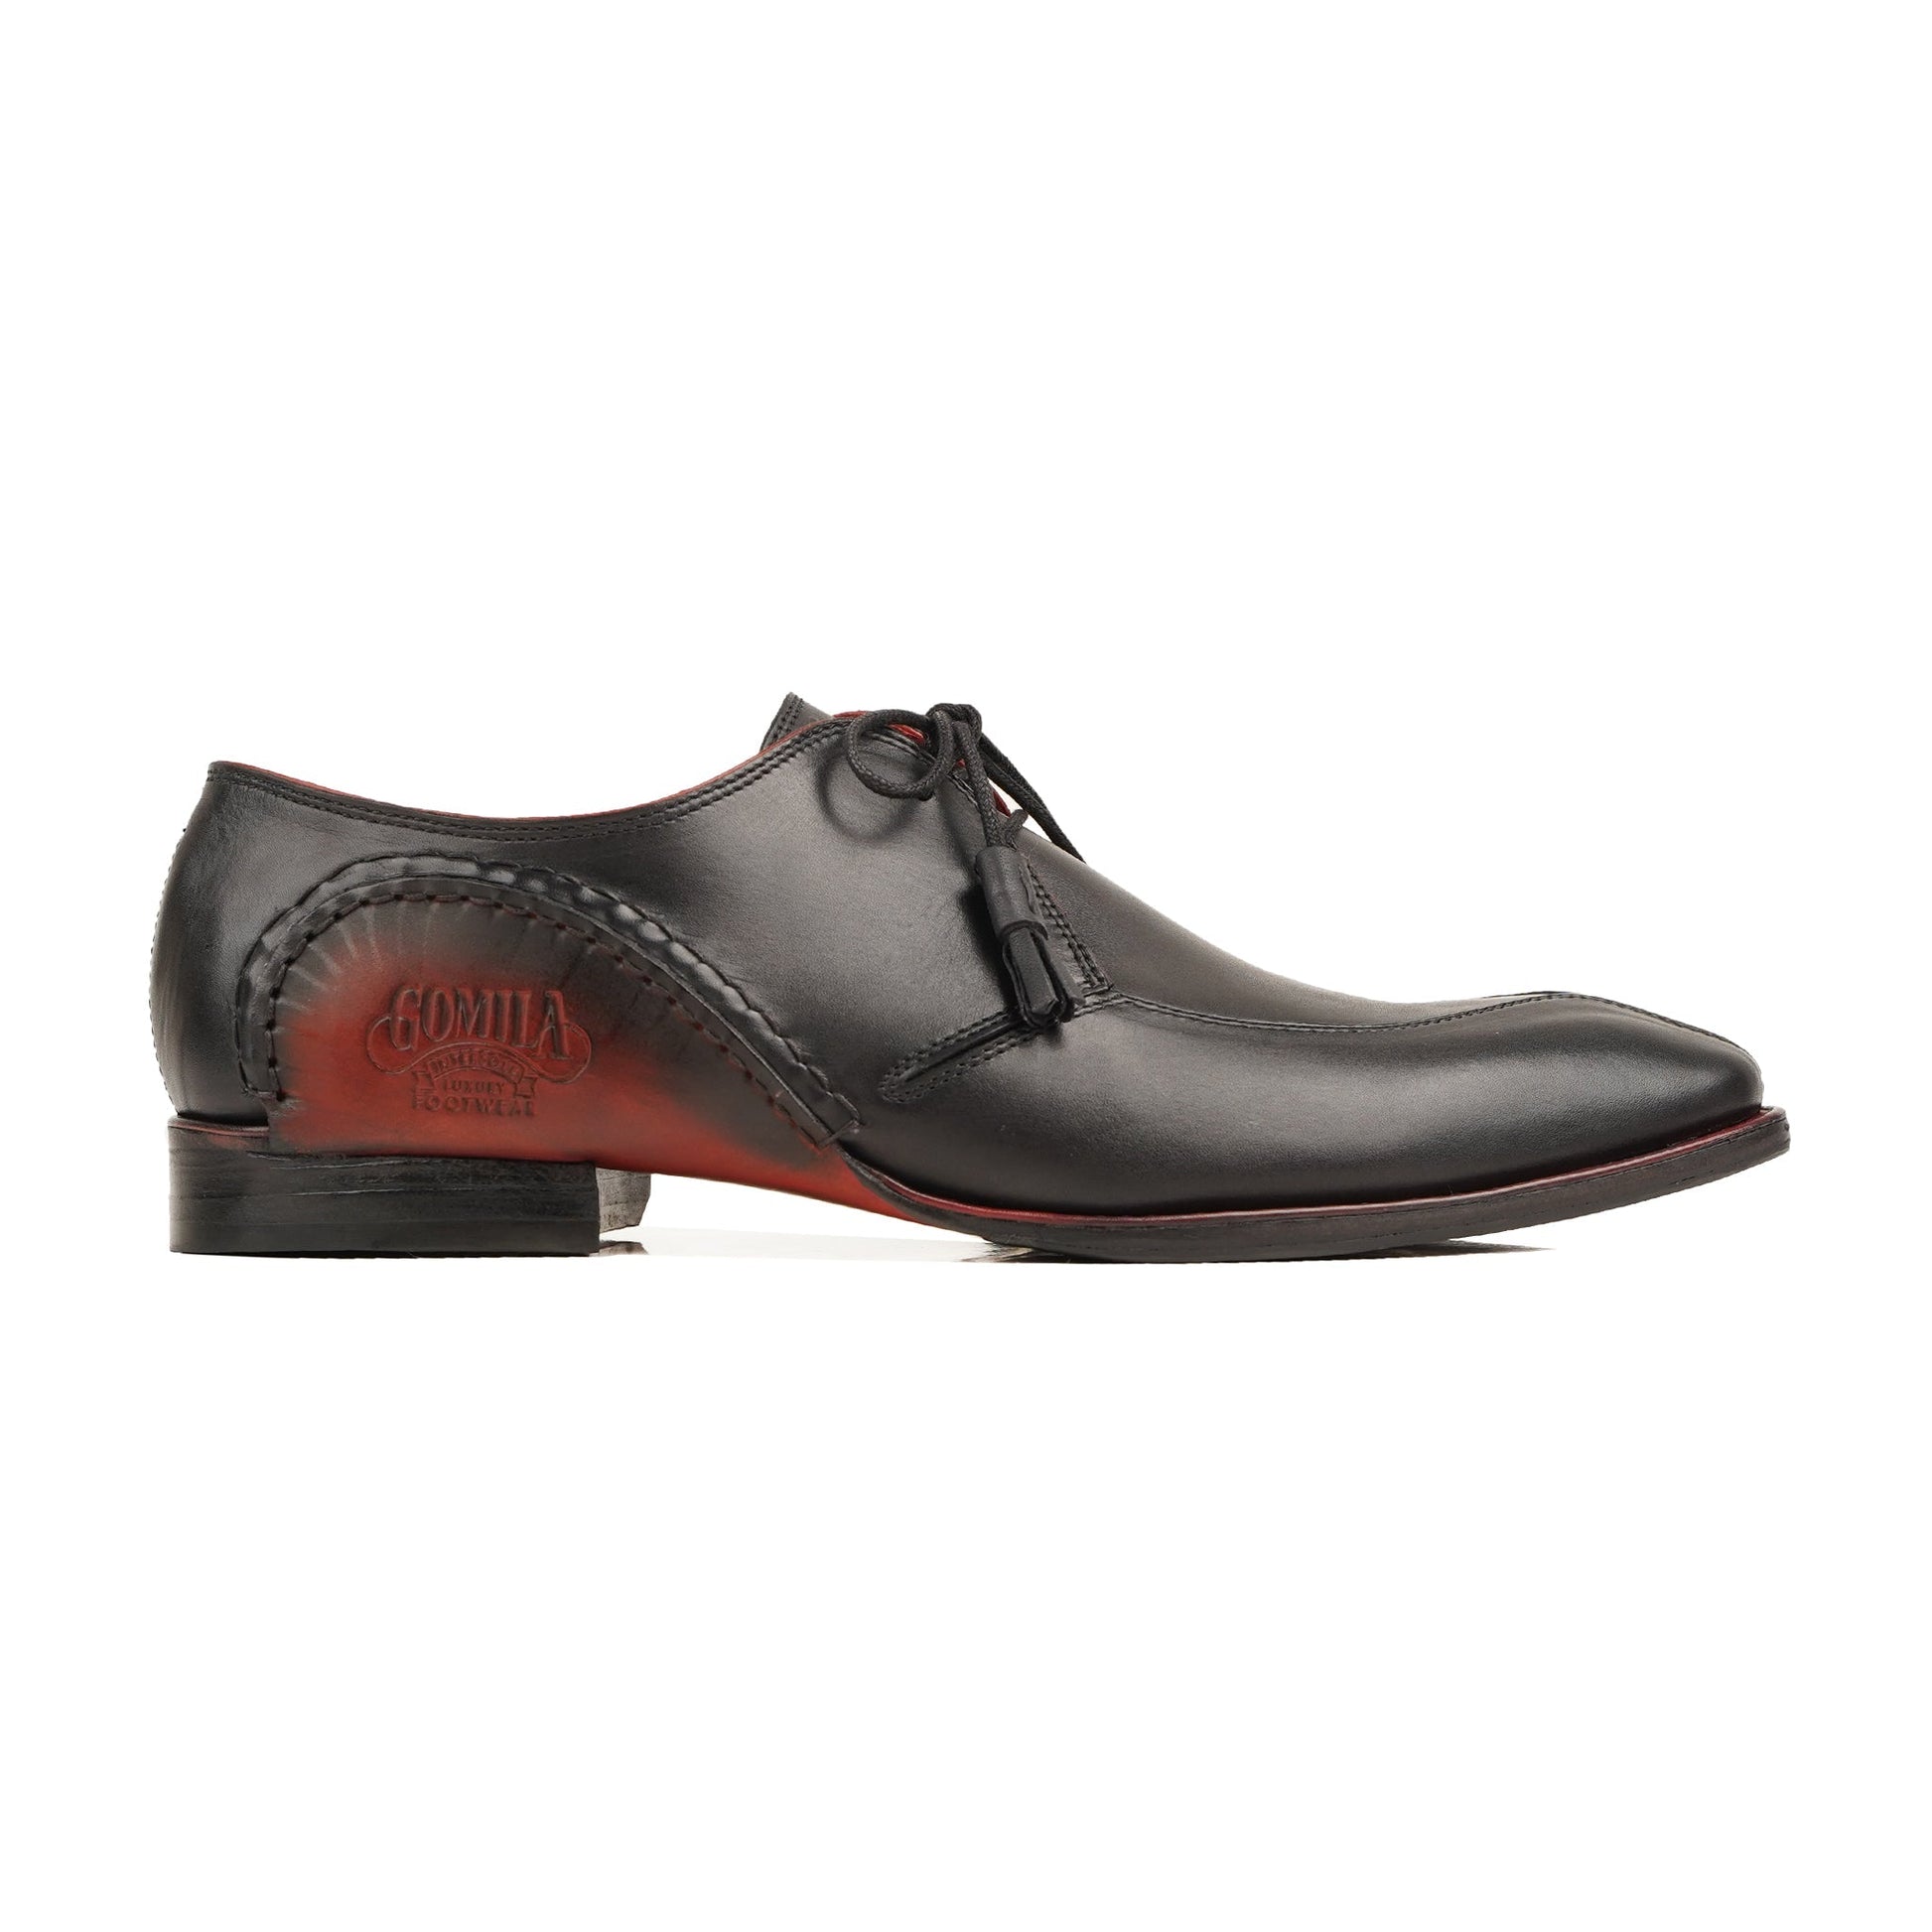 Premium Leather Derby Shoes | Online Derby and Oxford Shoes Derby Boots, derby shoes, derby shoes men, Leather Boots